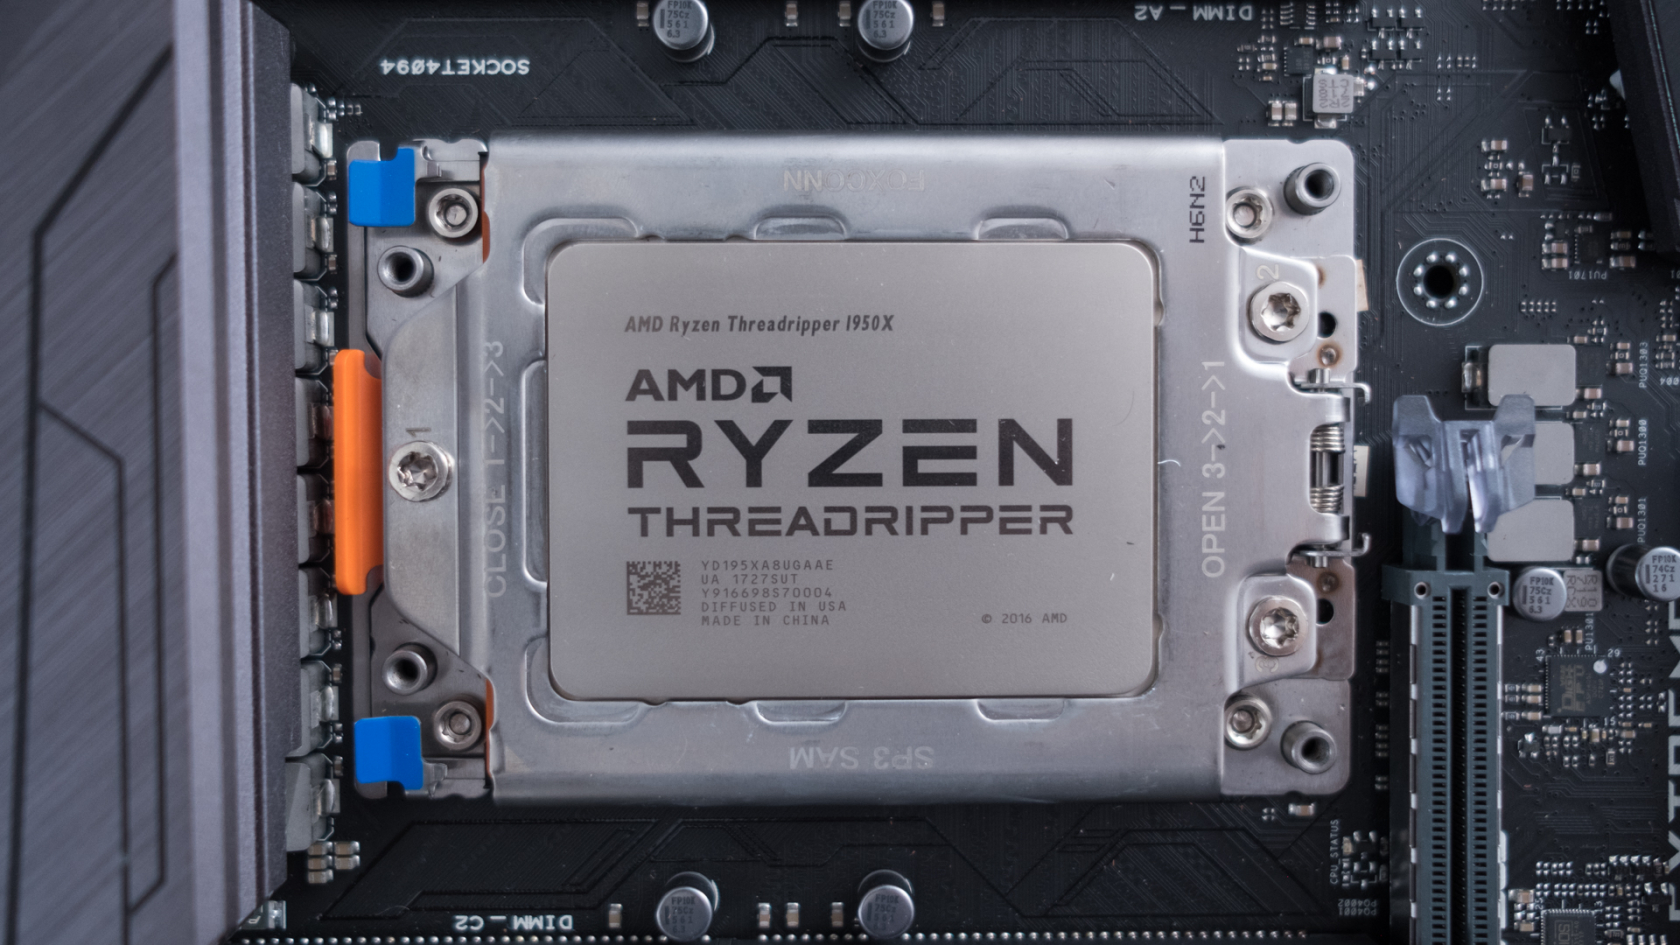 AMD just slashed the price of its Ryzen Threadripper 1950X to $880